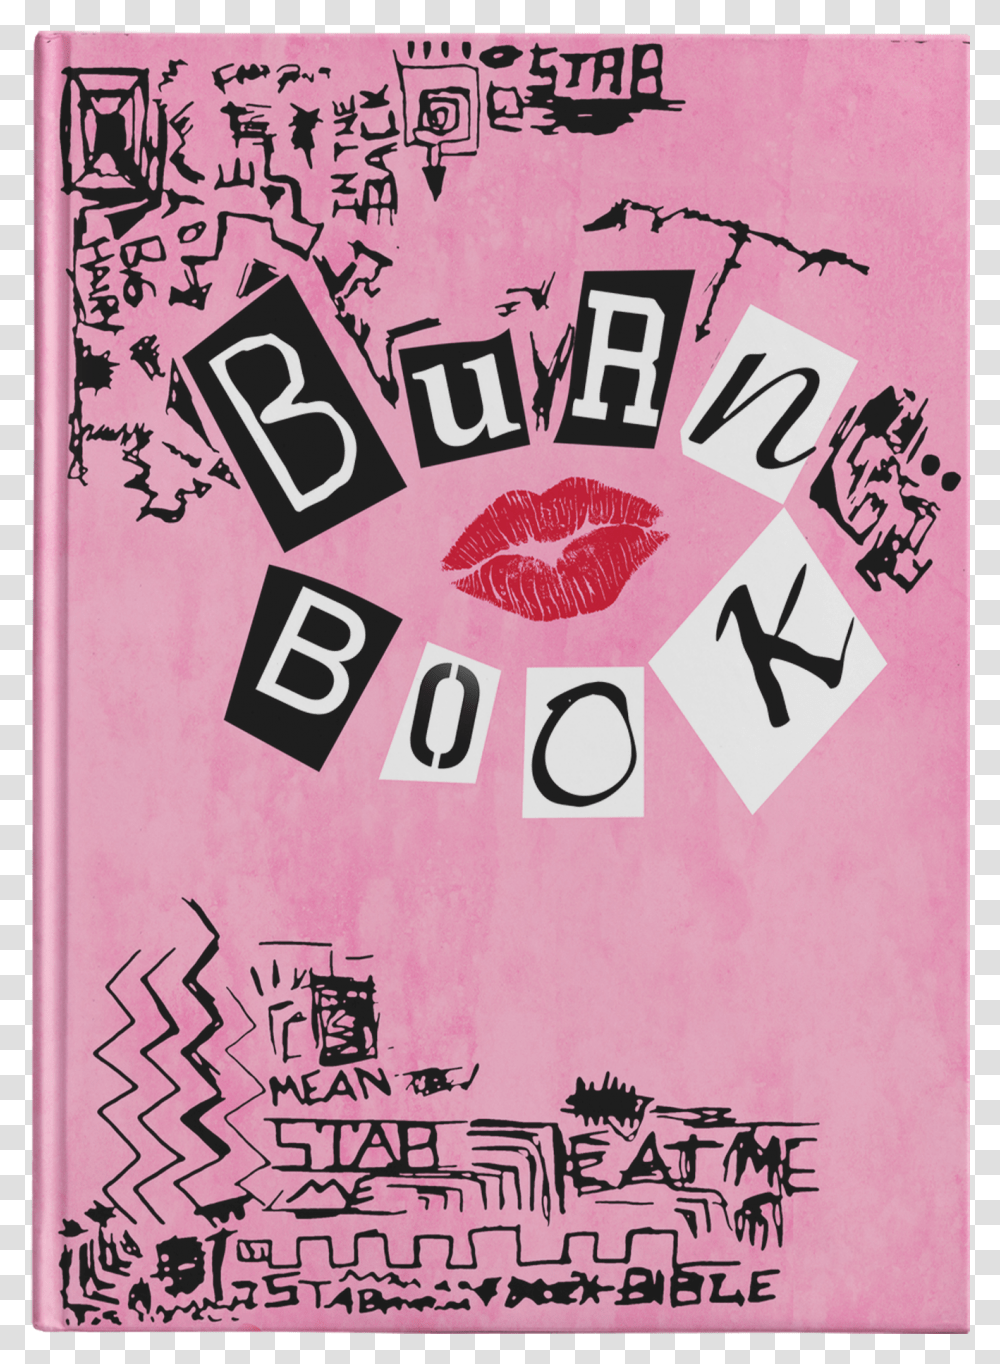 Mean Girls Burn Book Cover, Poster, Advertisement, Flyer Transparent Png